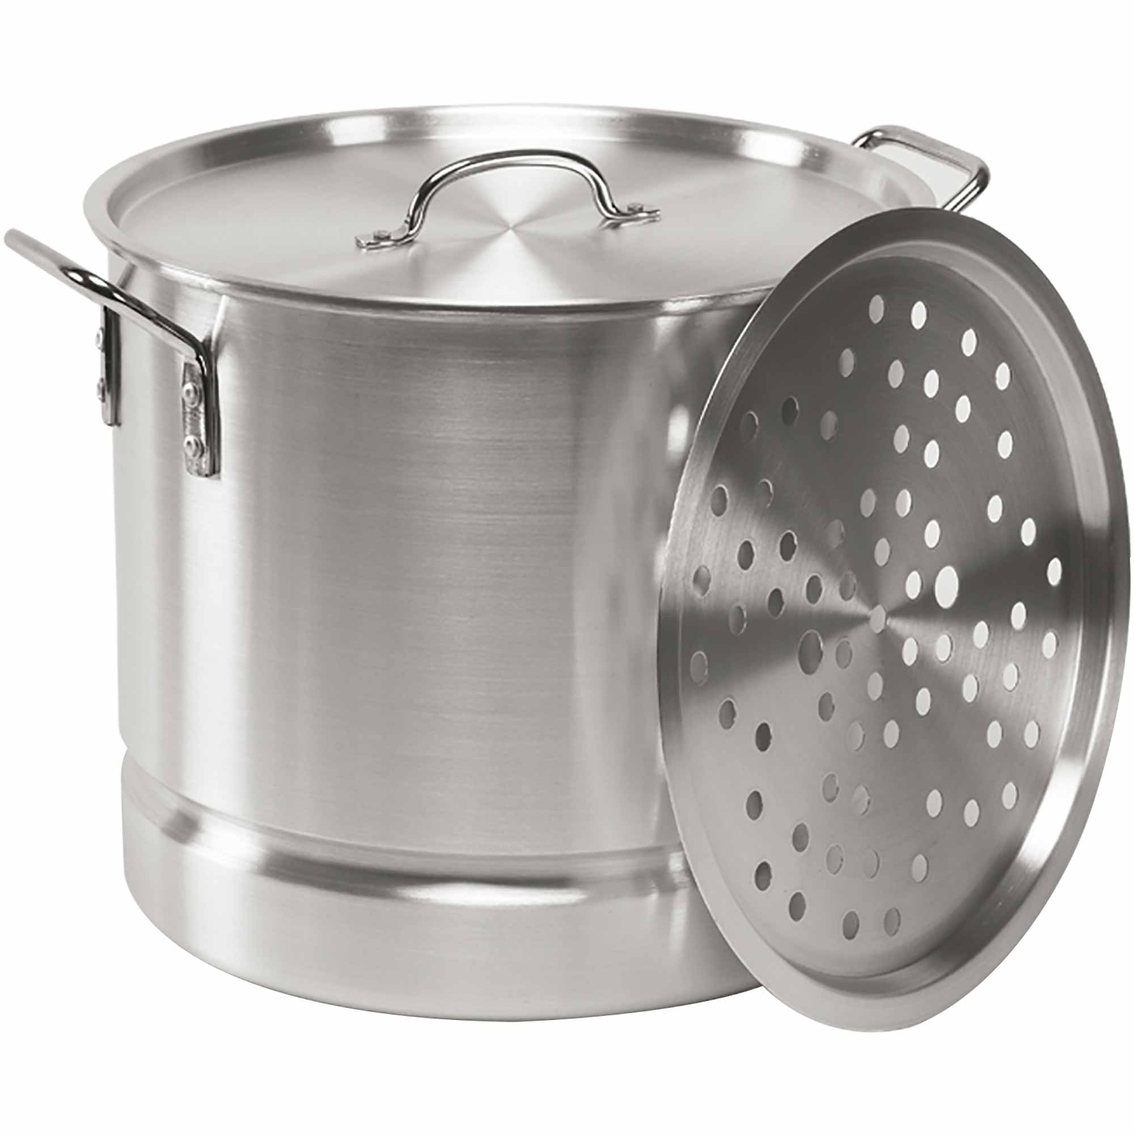 Imusa 12 Qt. Tamale Seafood Steamer, Stock Pots, Household